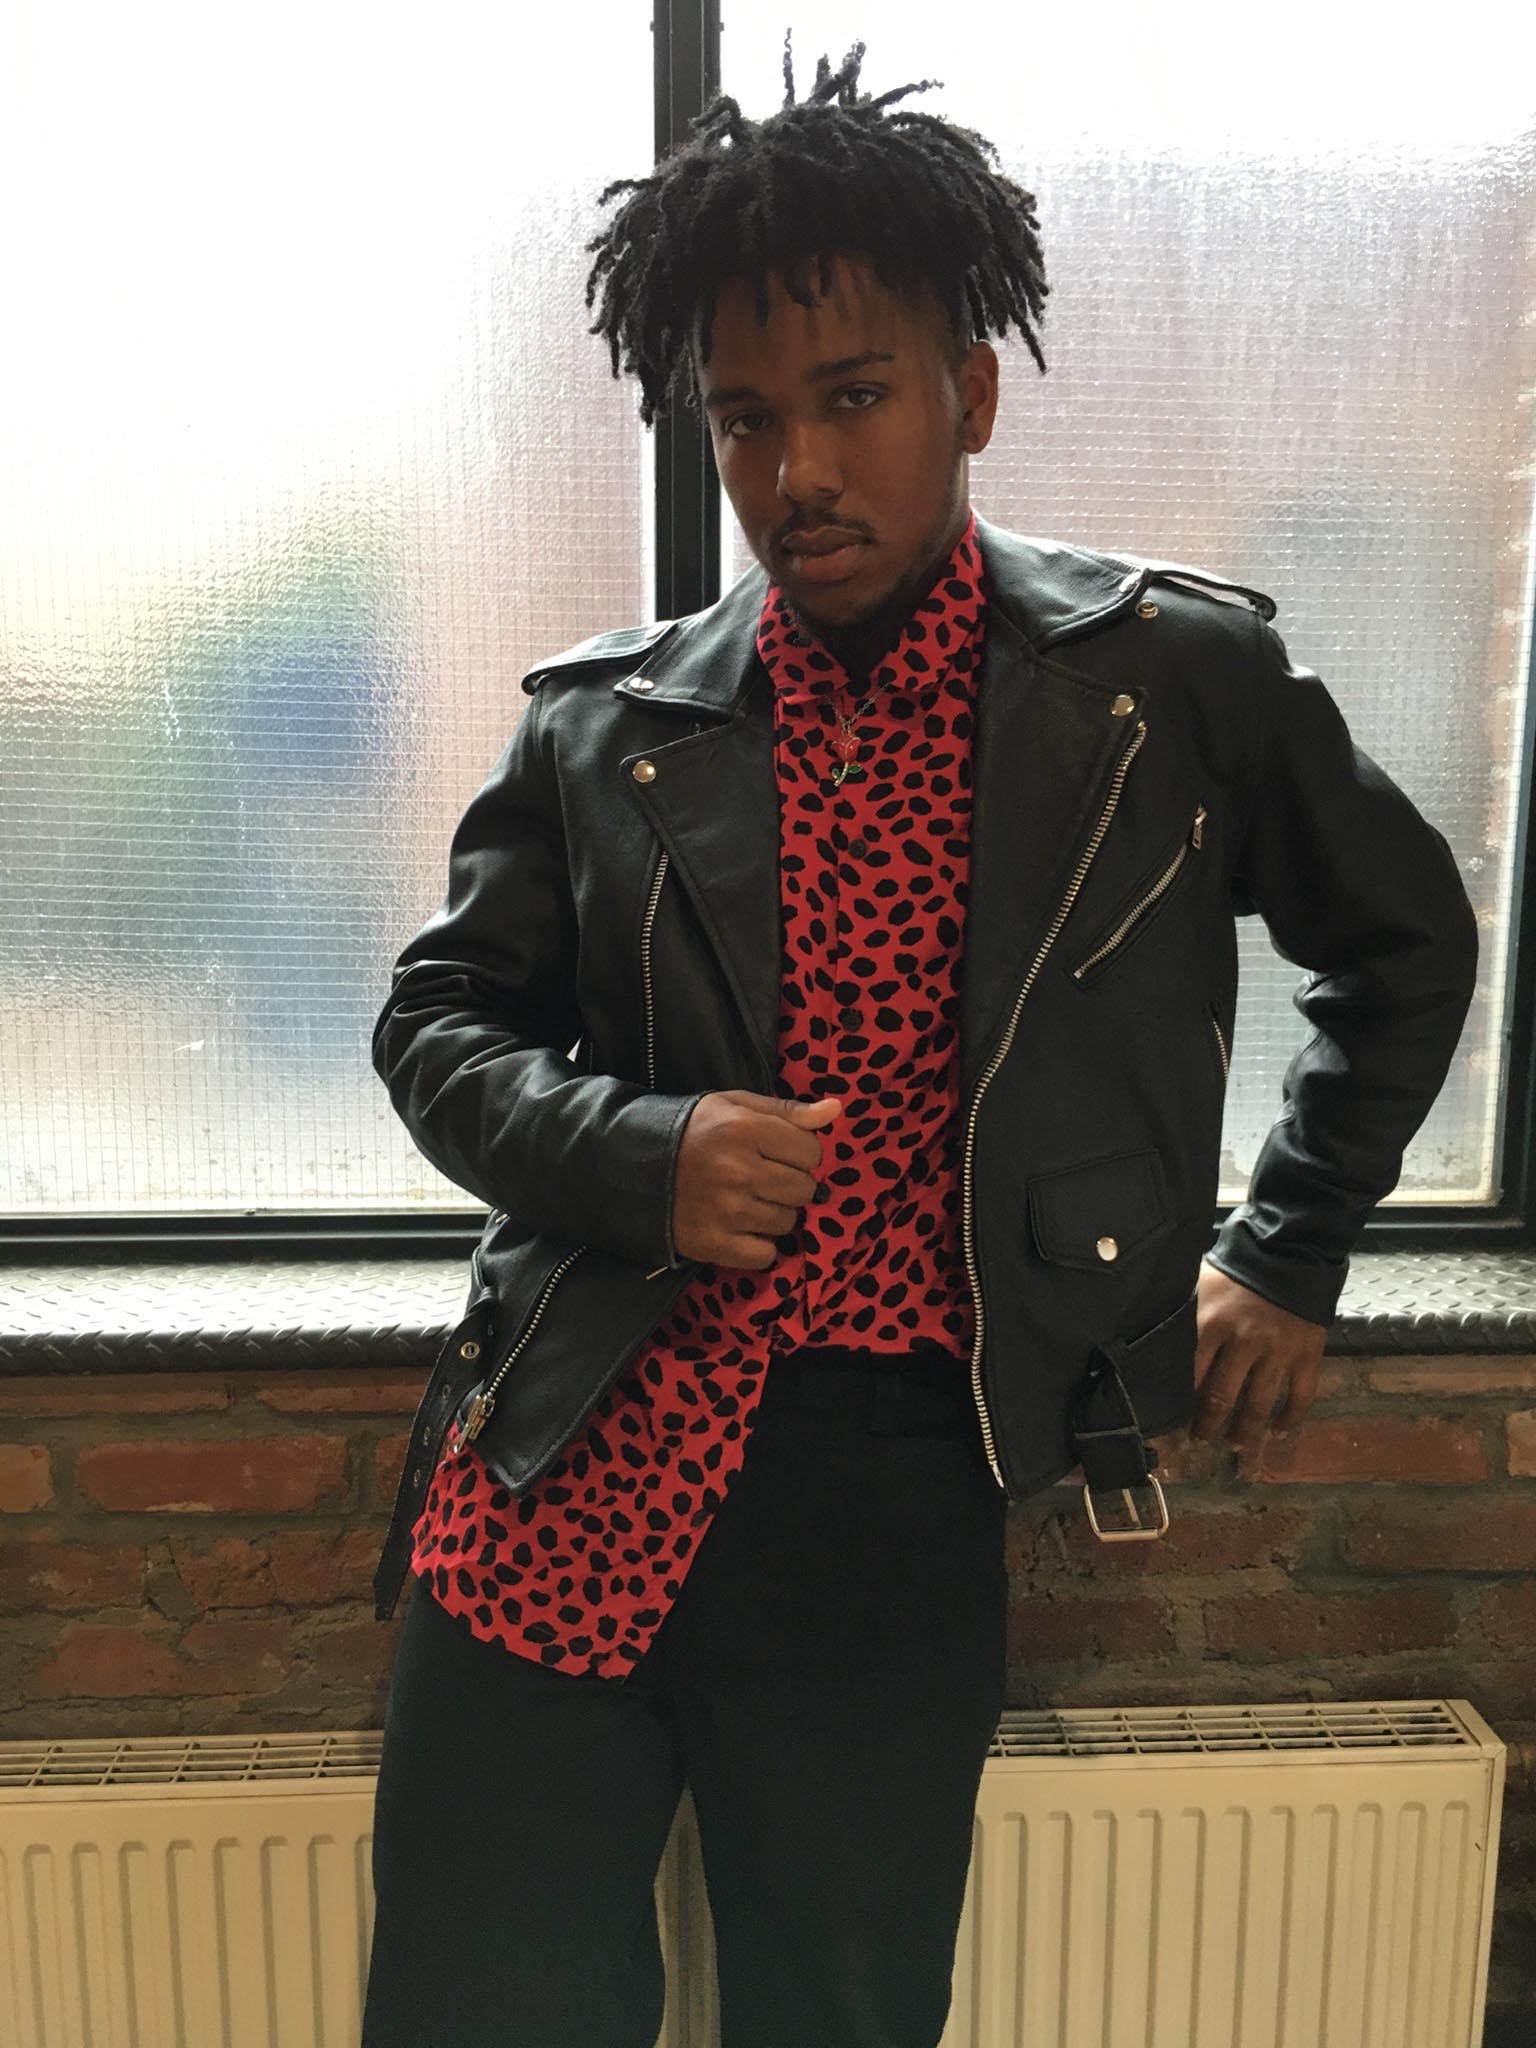 A person wearing a black leather jacket over a black and red printed shirt